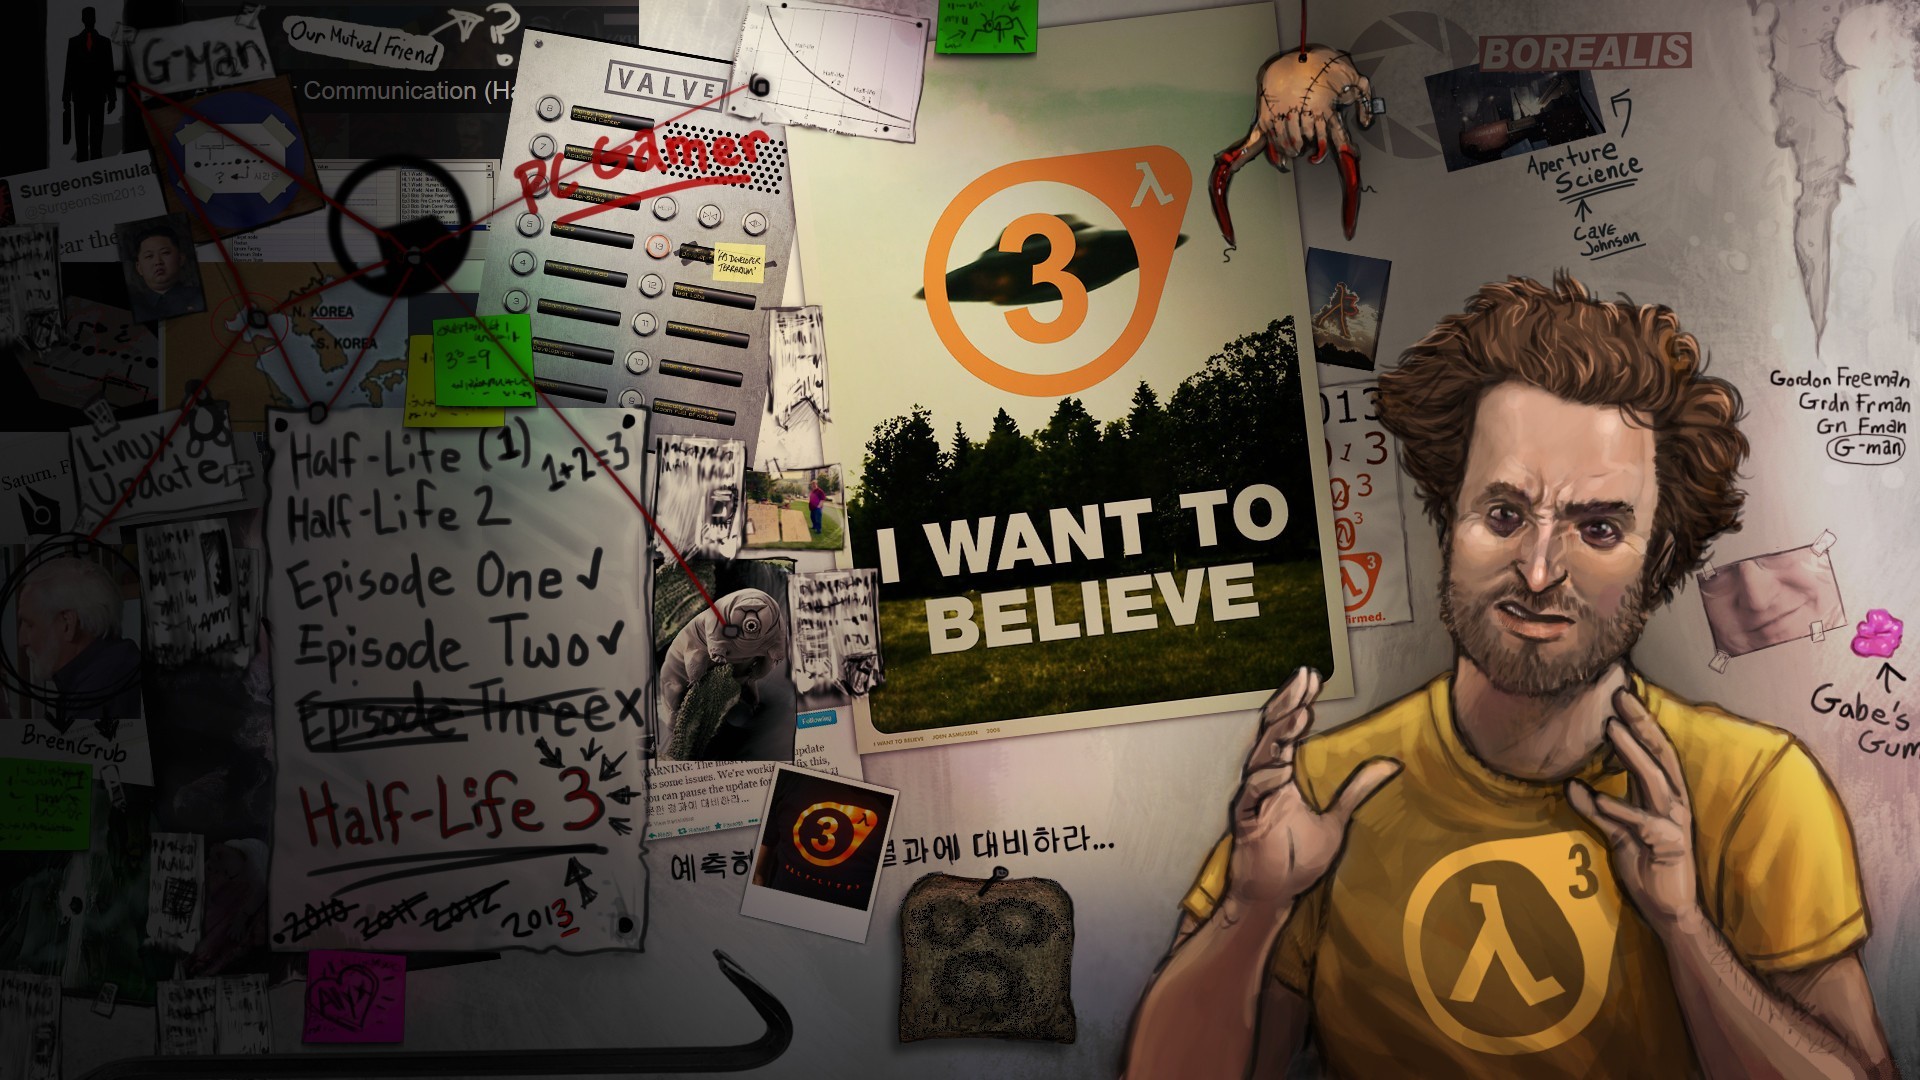 Half Life 3 – I want to believe [Wallpaper] …